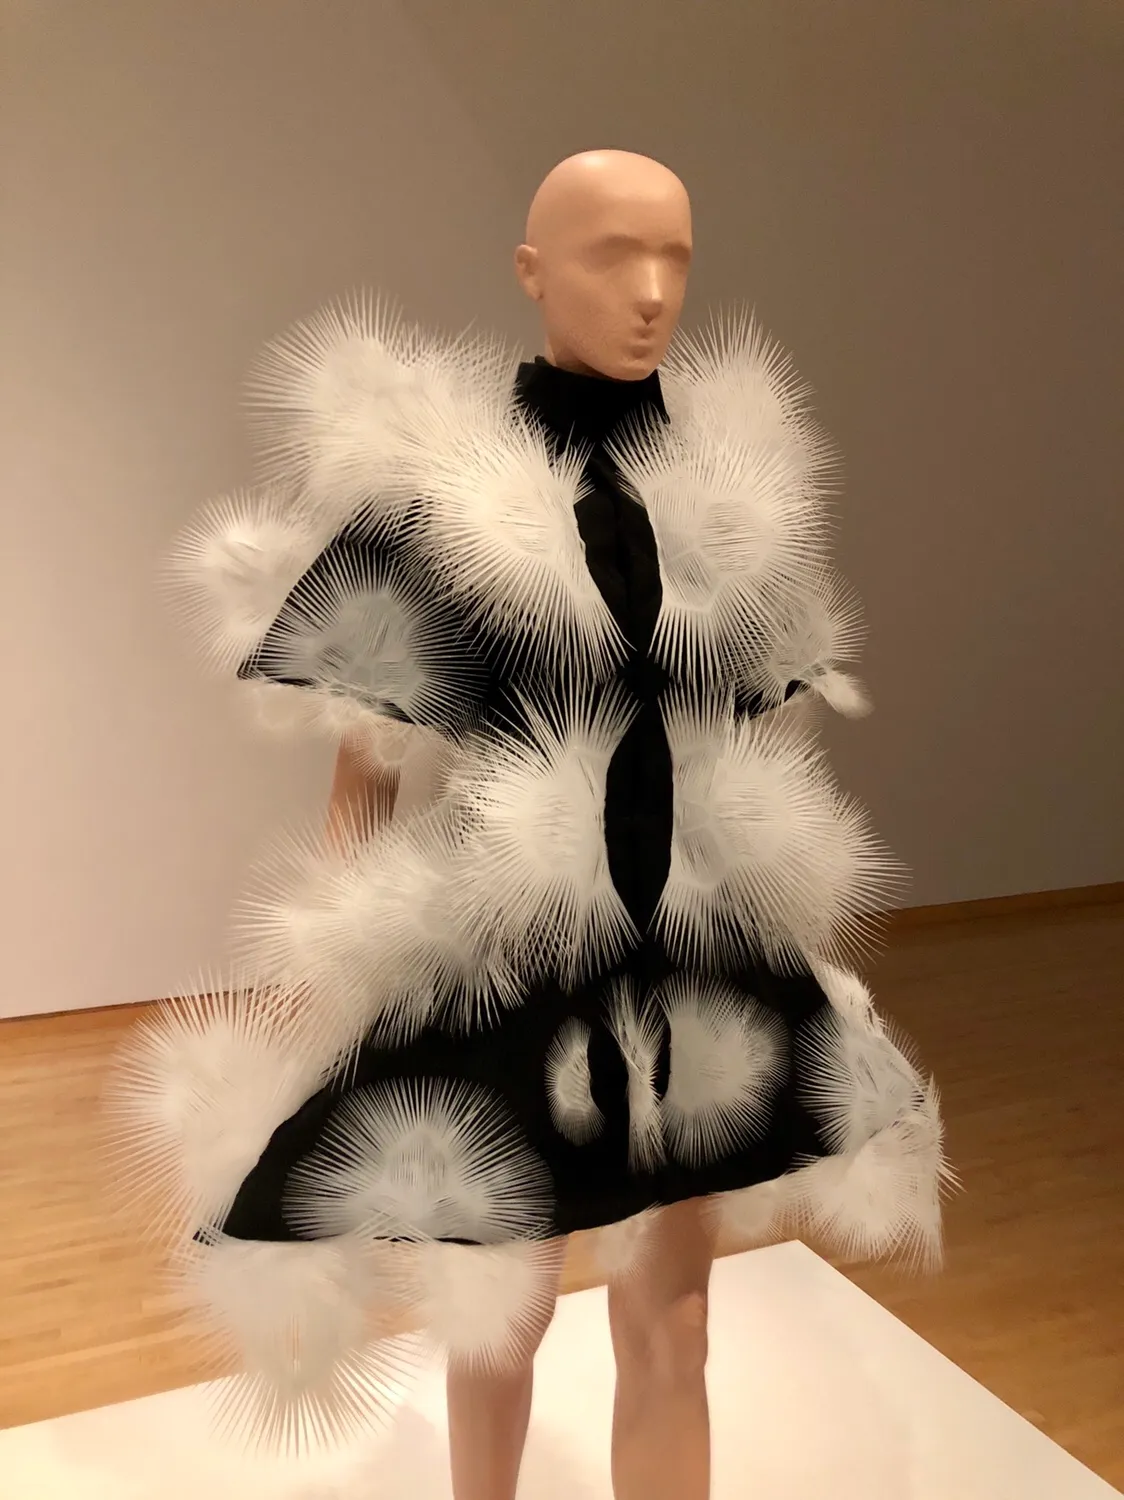 A mannequin wearing a black and white dress

Description automatically generated